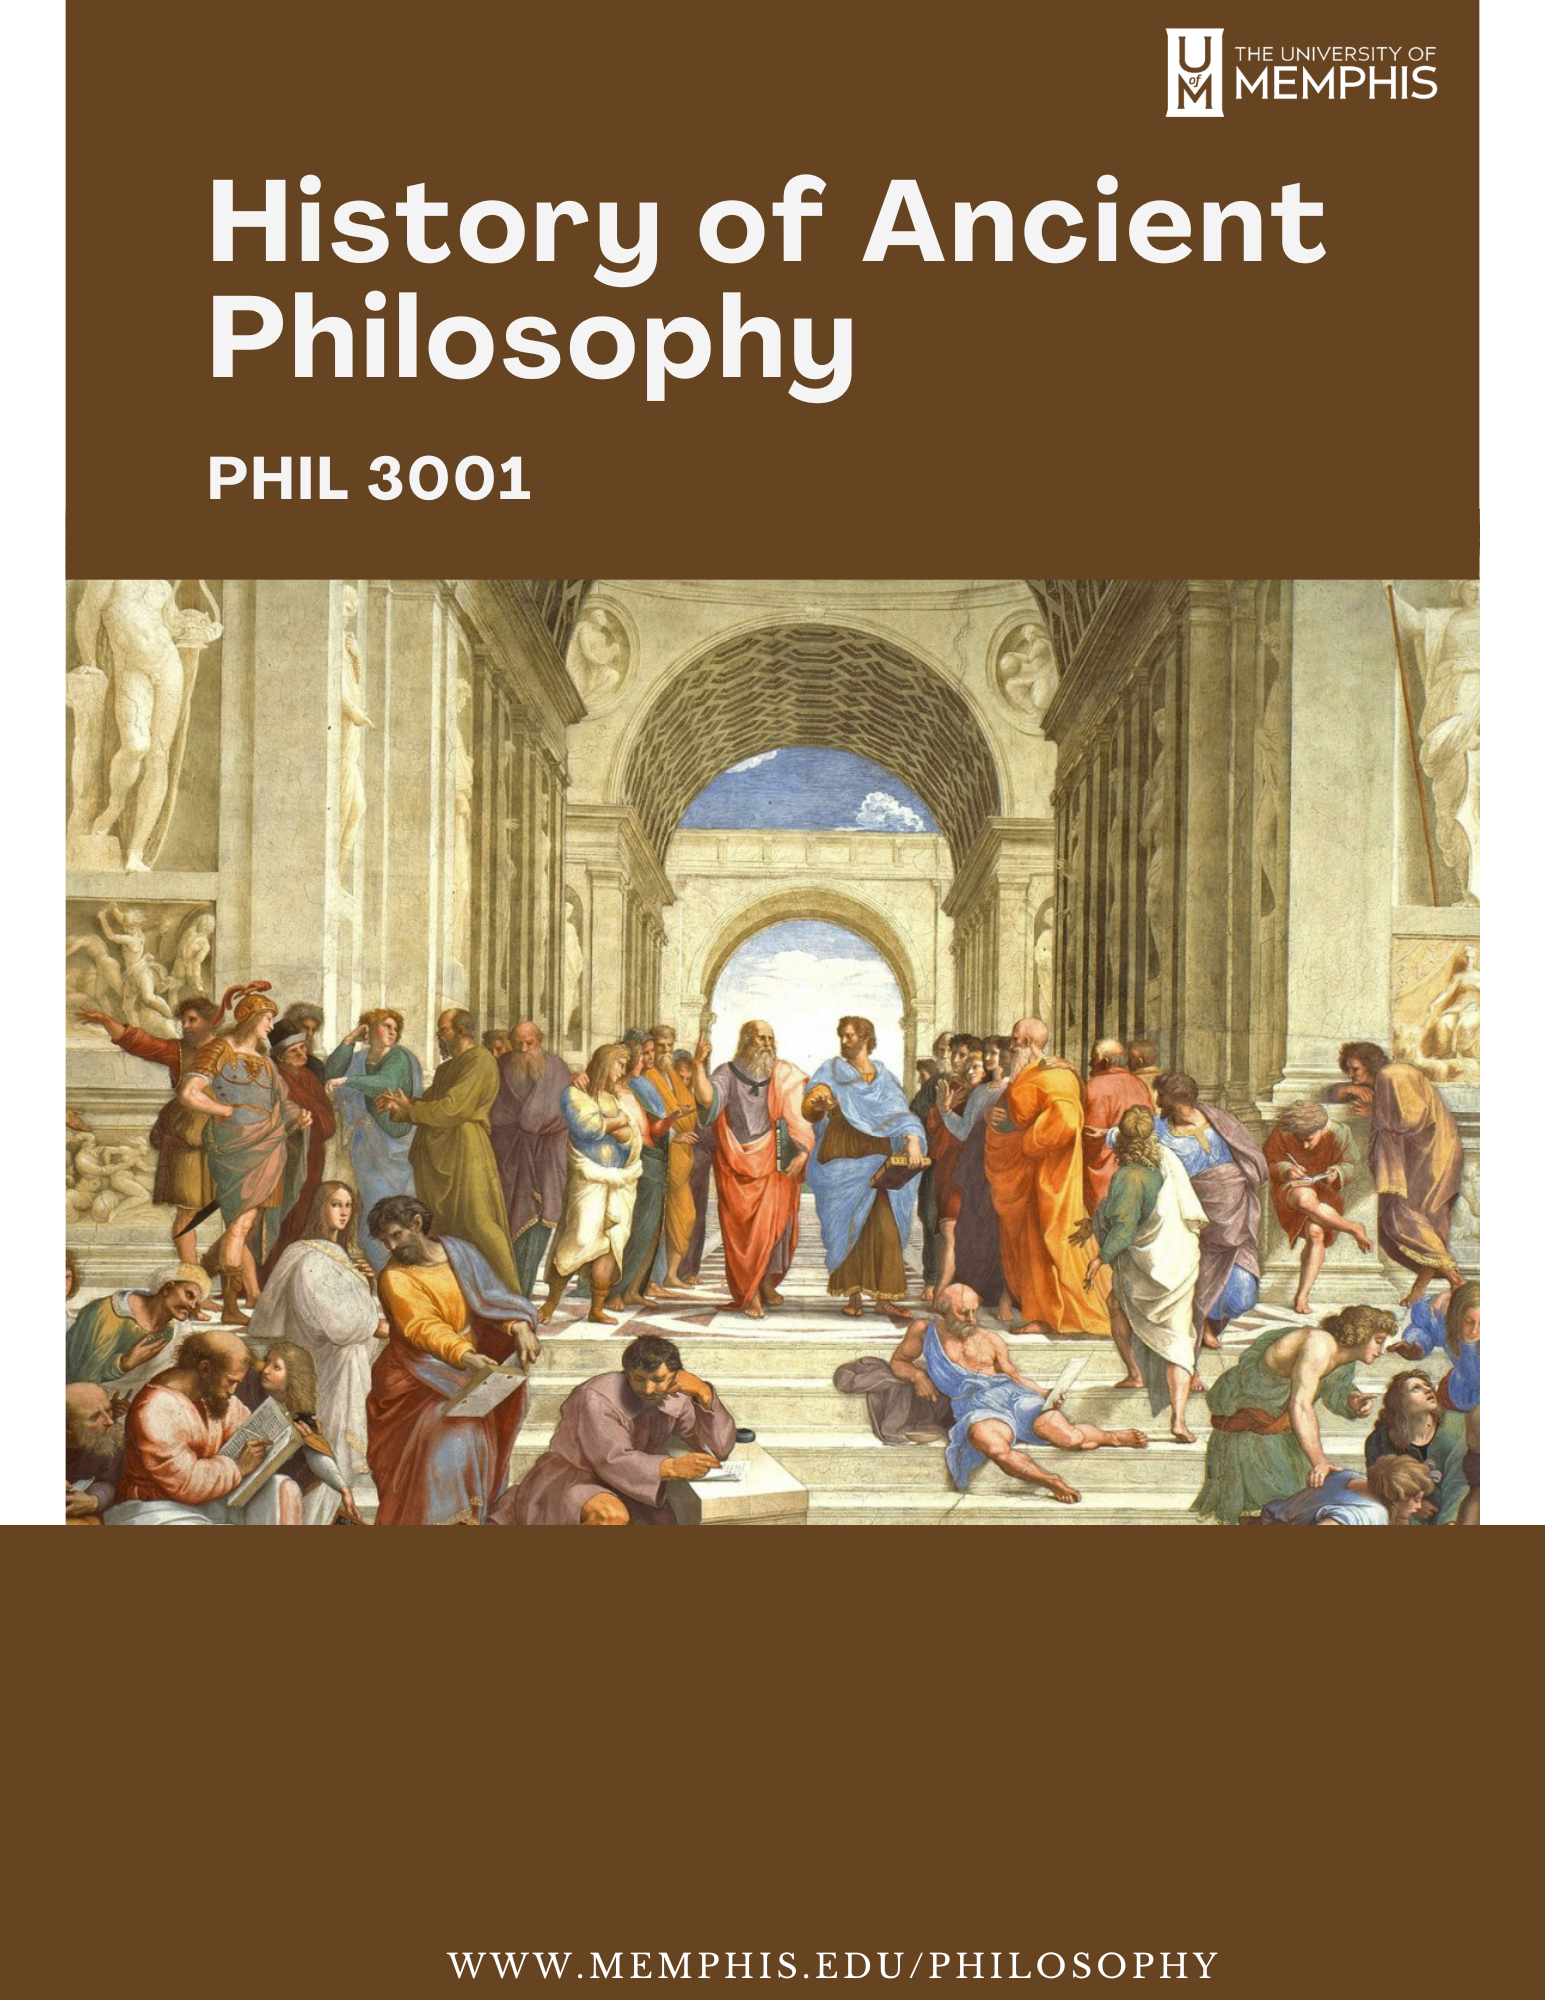 Ancient Philosophy Poster